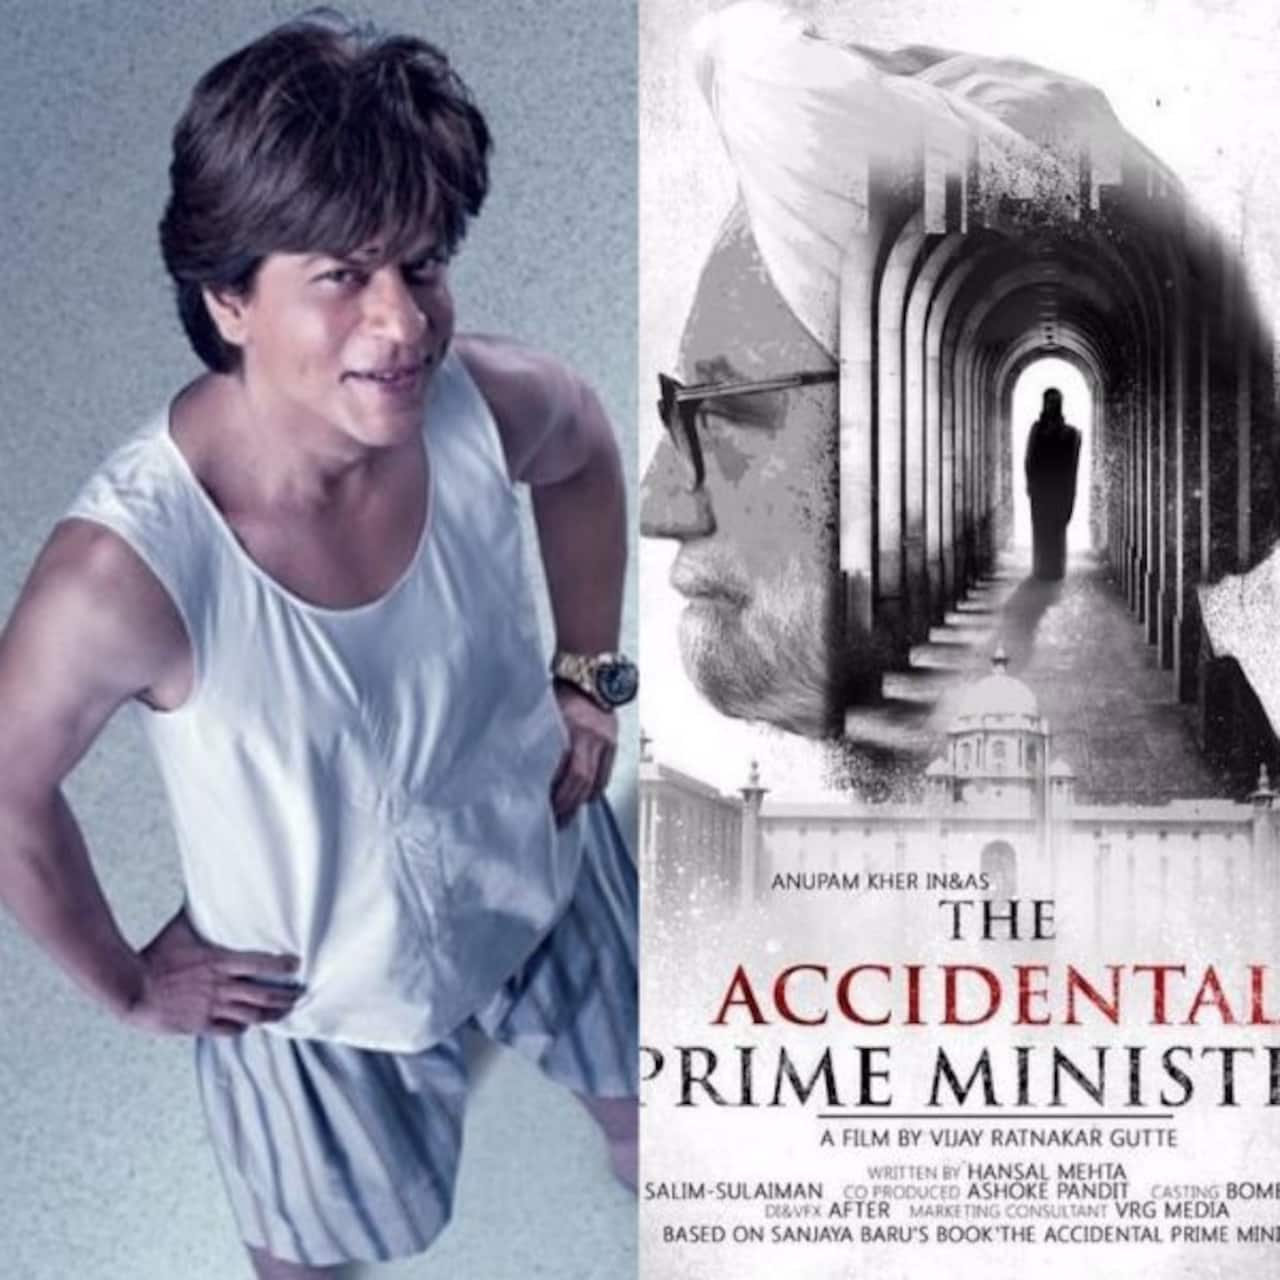 Shah Rukh Khan's Zero to CLASH with Anupam Kher's The Accidental Prime Minister on December 21